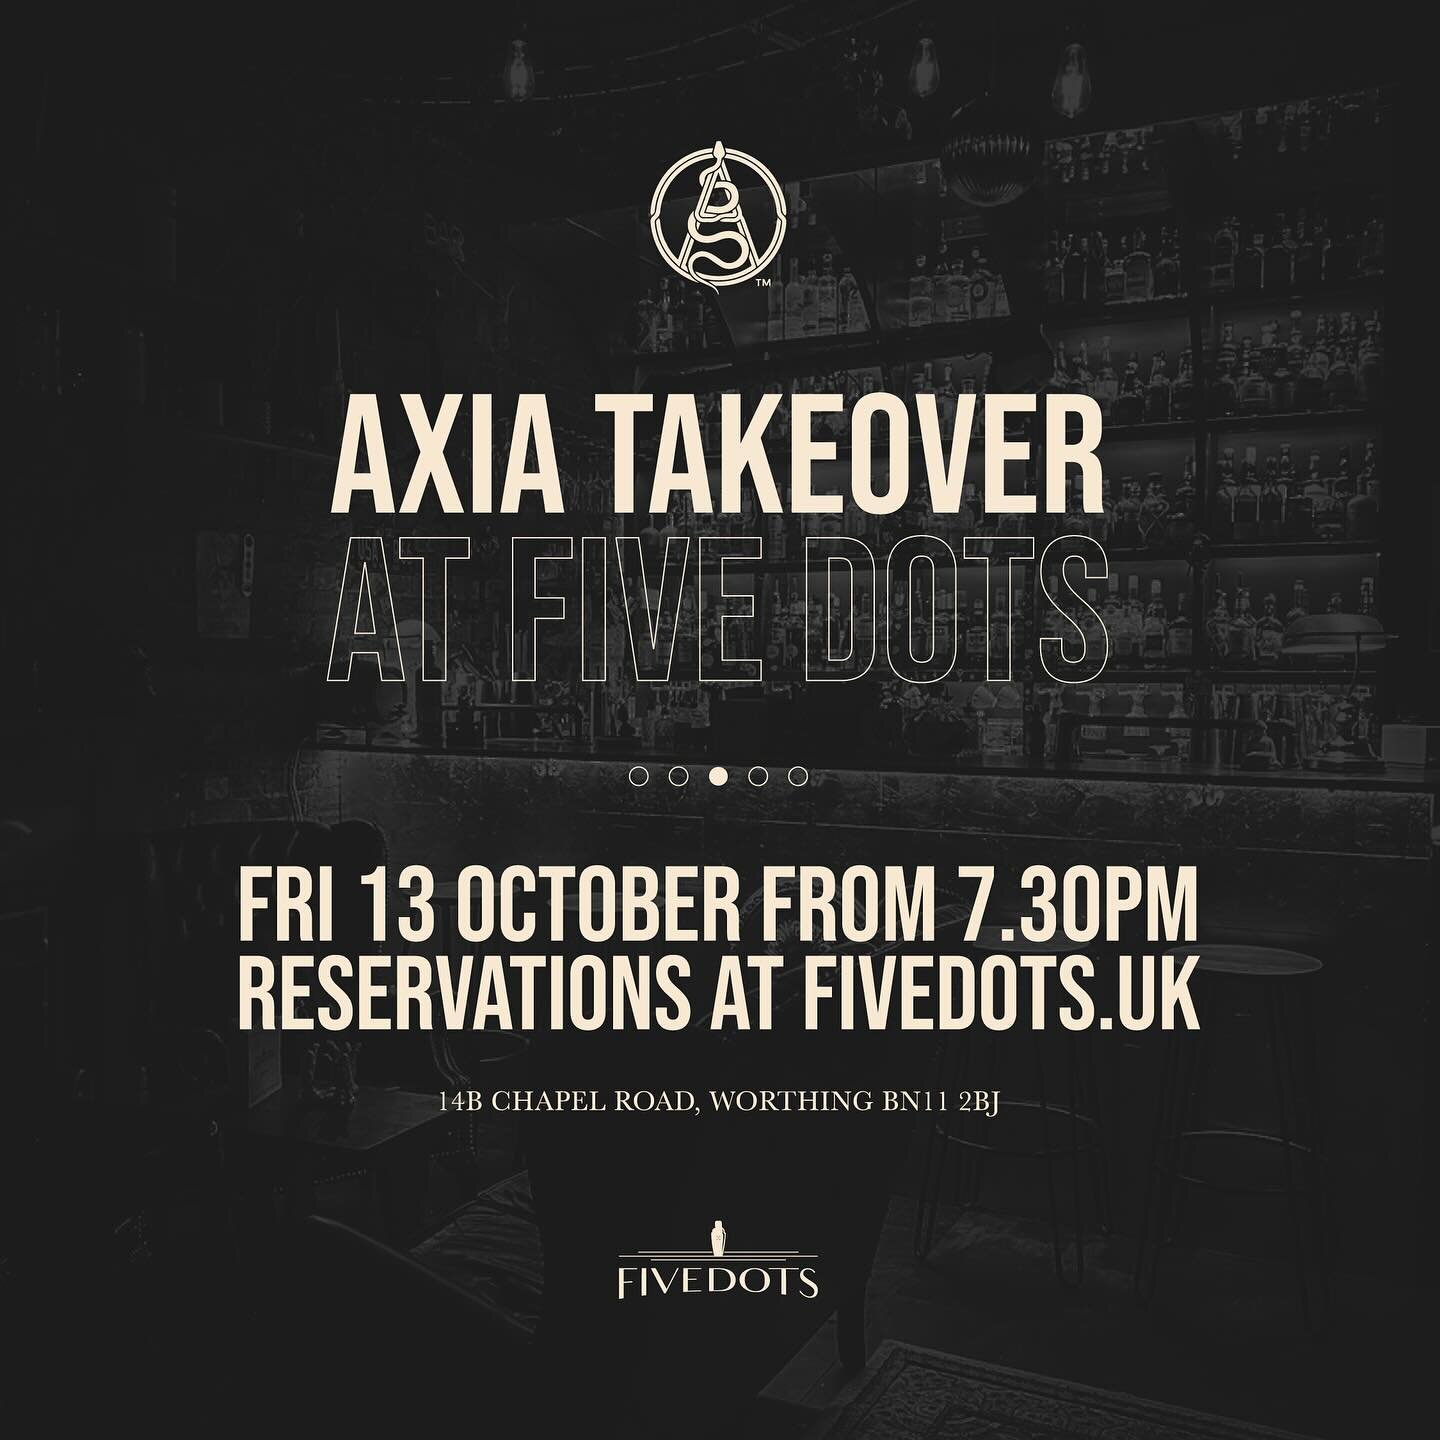 Join us as we host an unforgettable takeover with @axiaspirit this Friday the 13th 🍸🙌

Dive into a world of flavour featuring the iconic Axia Spirits. Don't miss this chance to get up close and personal with the brand that's redefining mixology at 